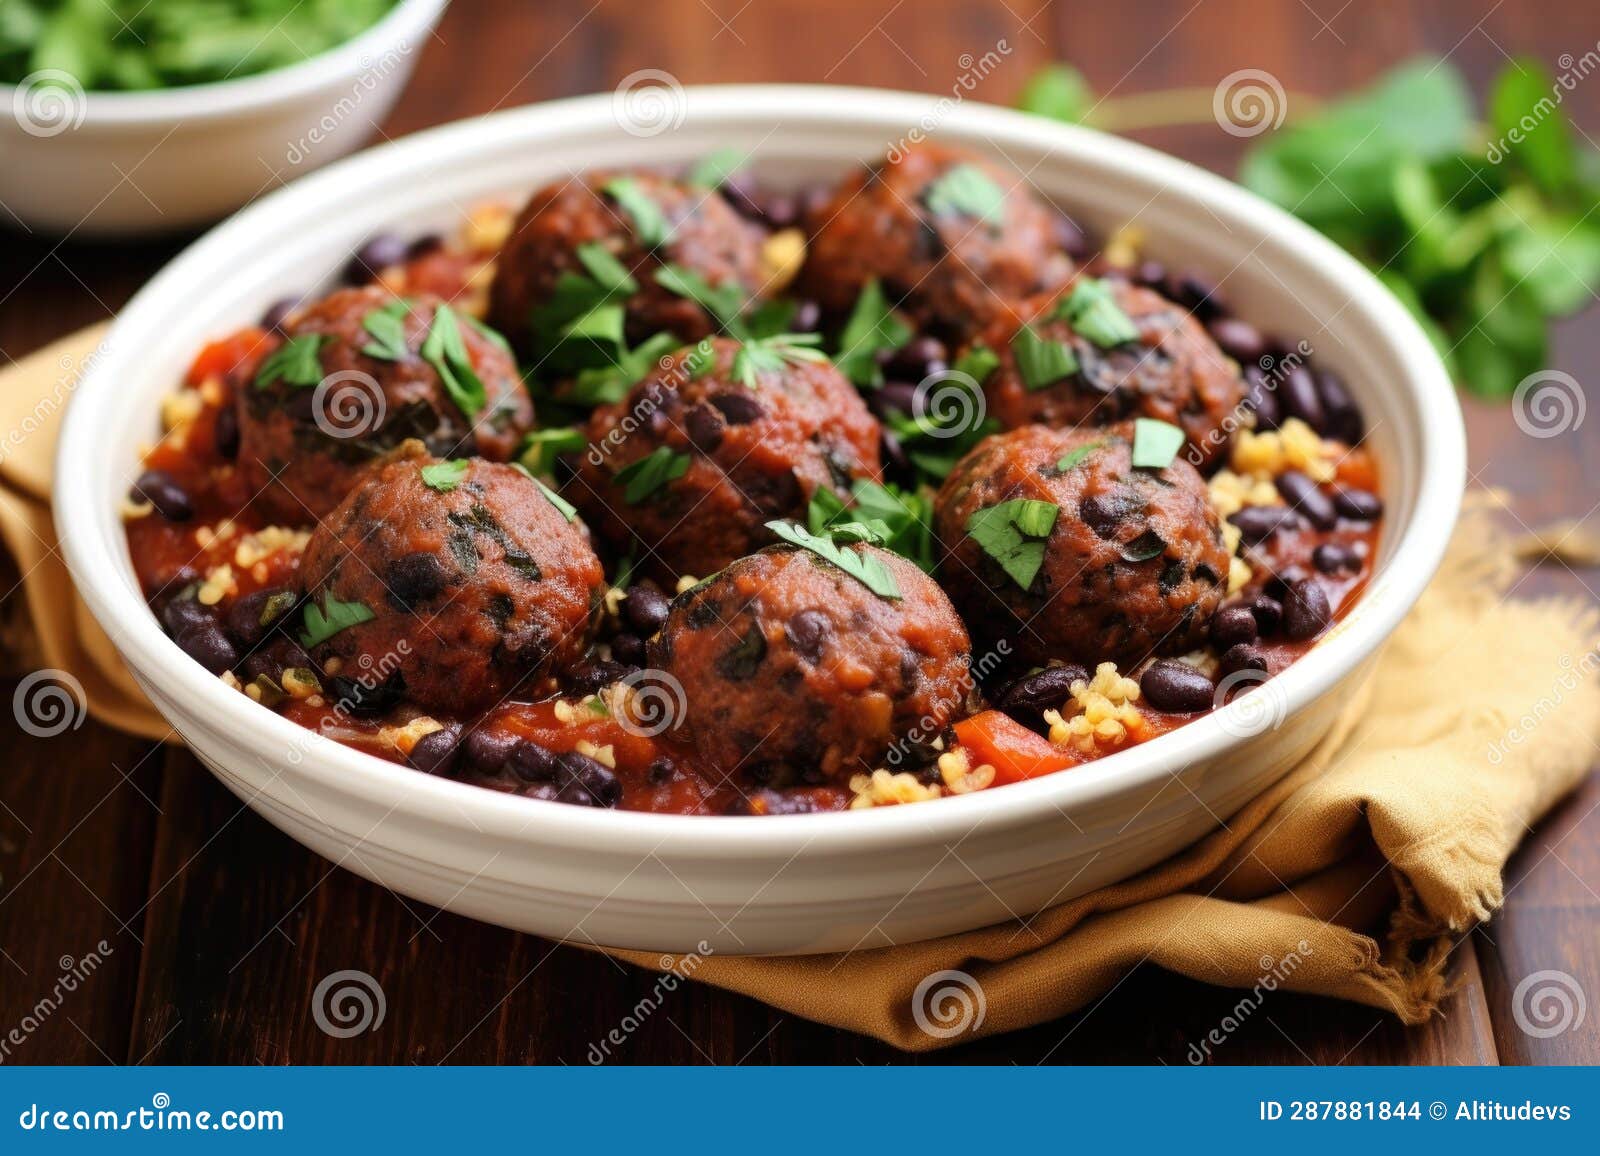 Quinoa and Black Bean Meatless Meatballs Stock Photo - Image of ...